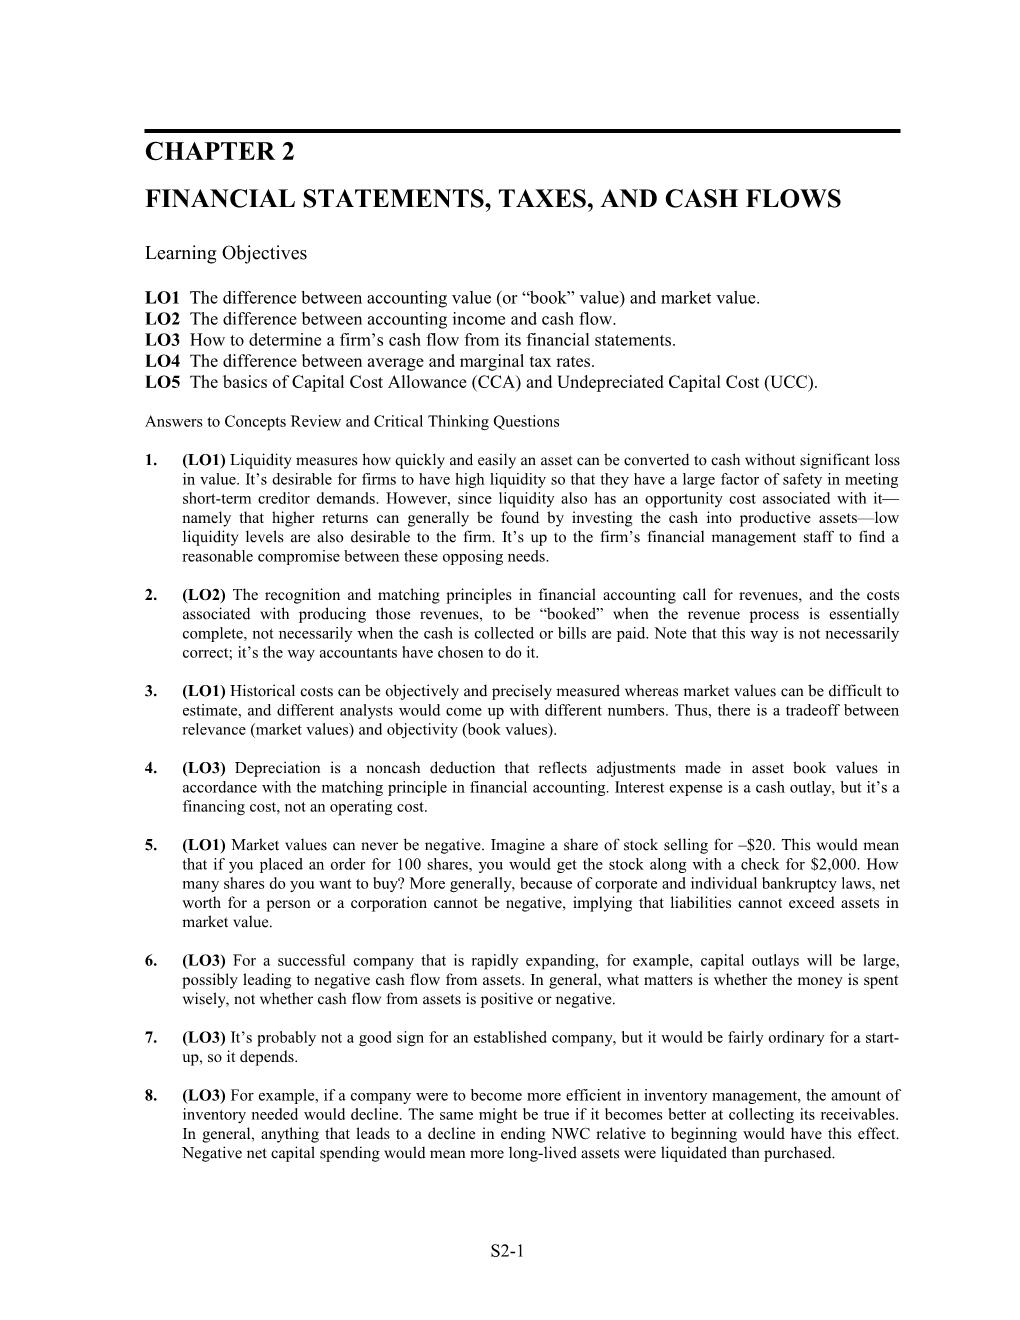 Financial Statements, Taxes, and Cash Flows